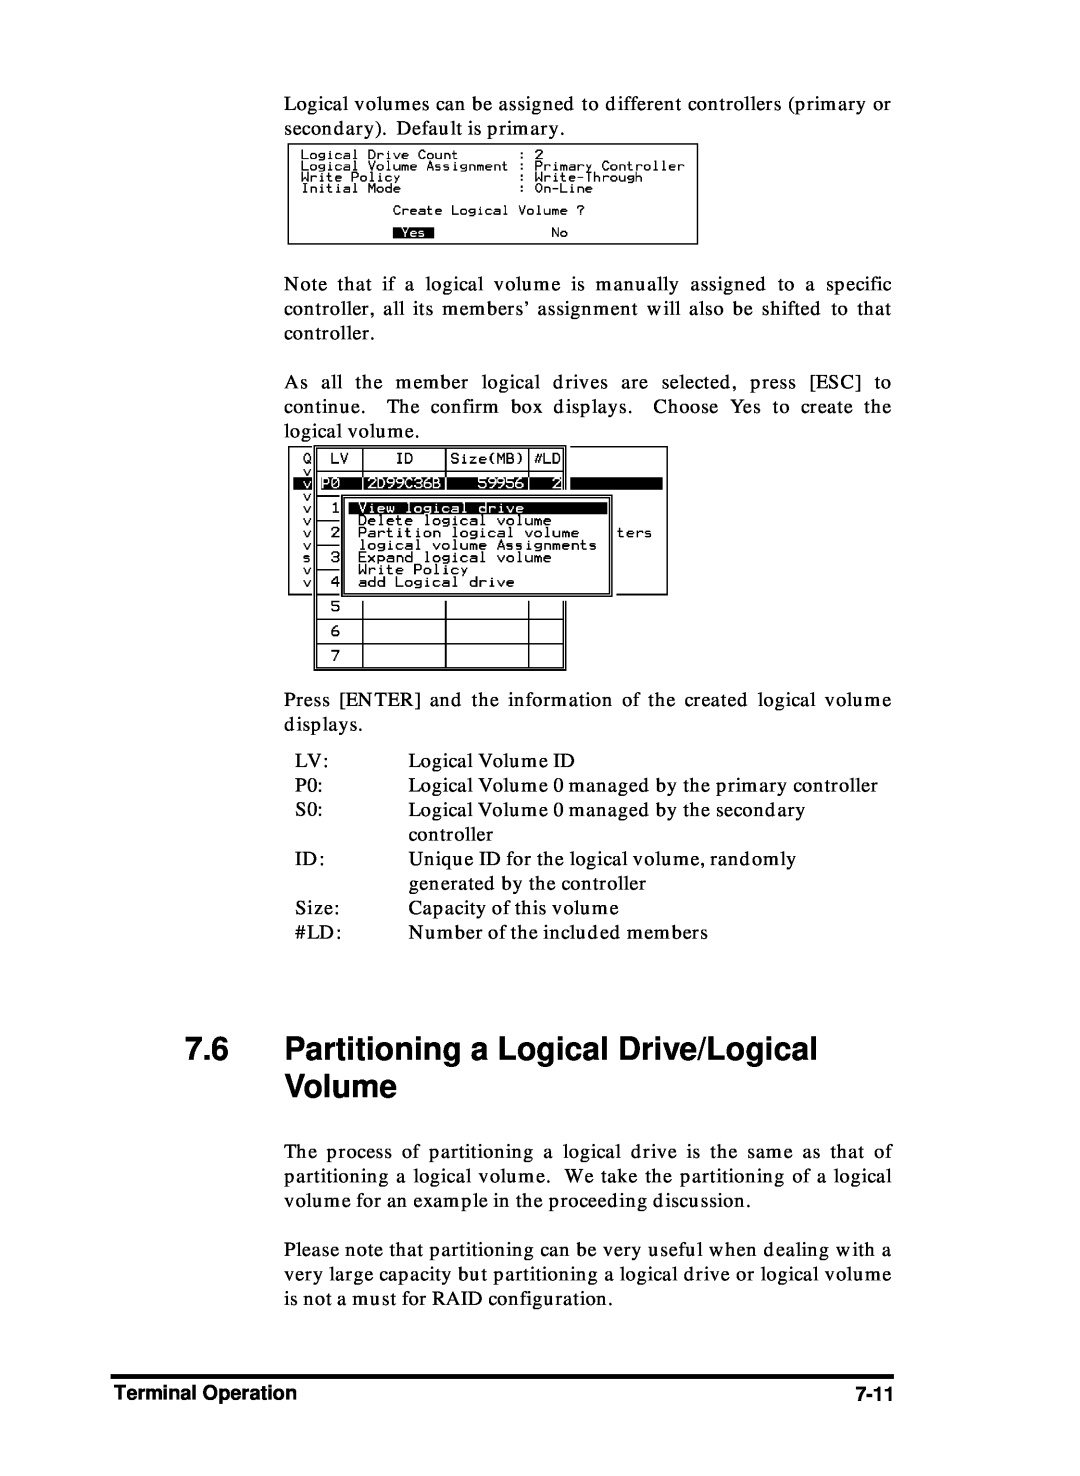 Compaq Infortrend manual Partitioning a Logical Drive/Logical Volume 